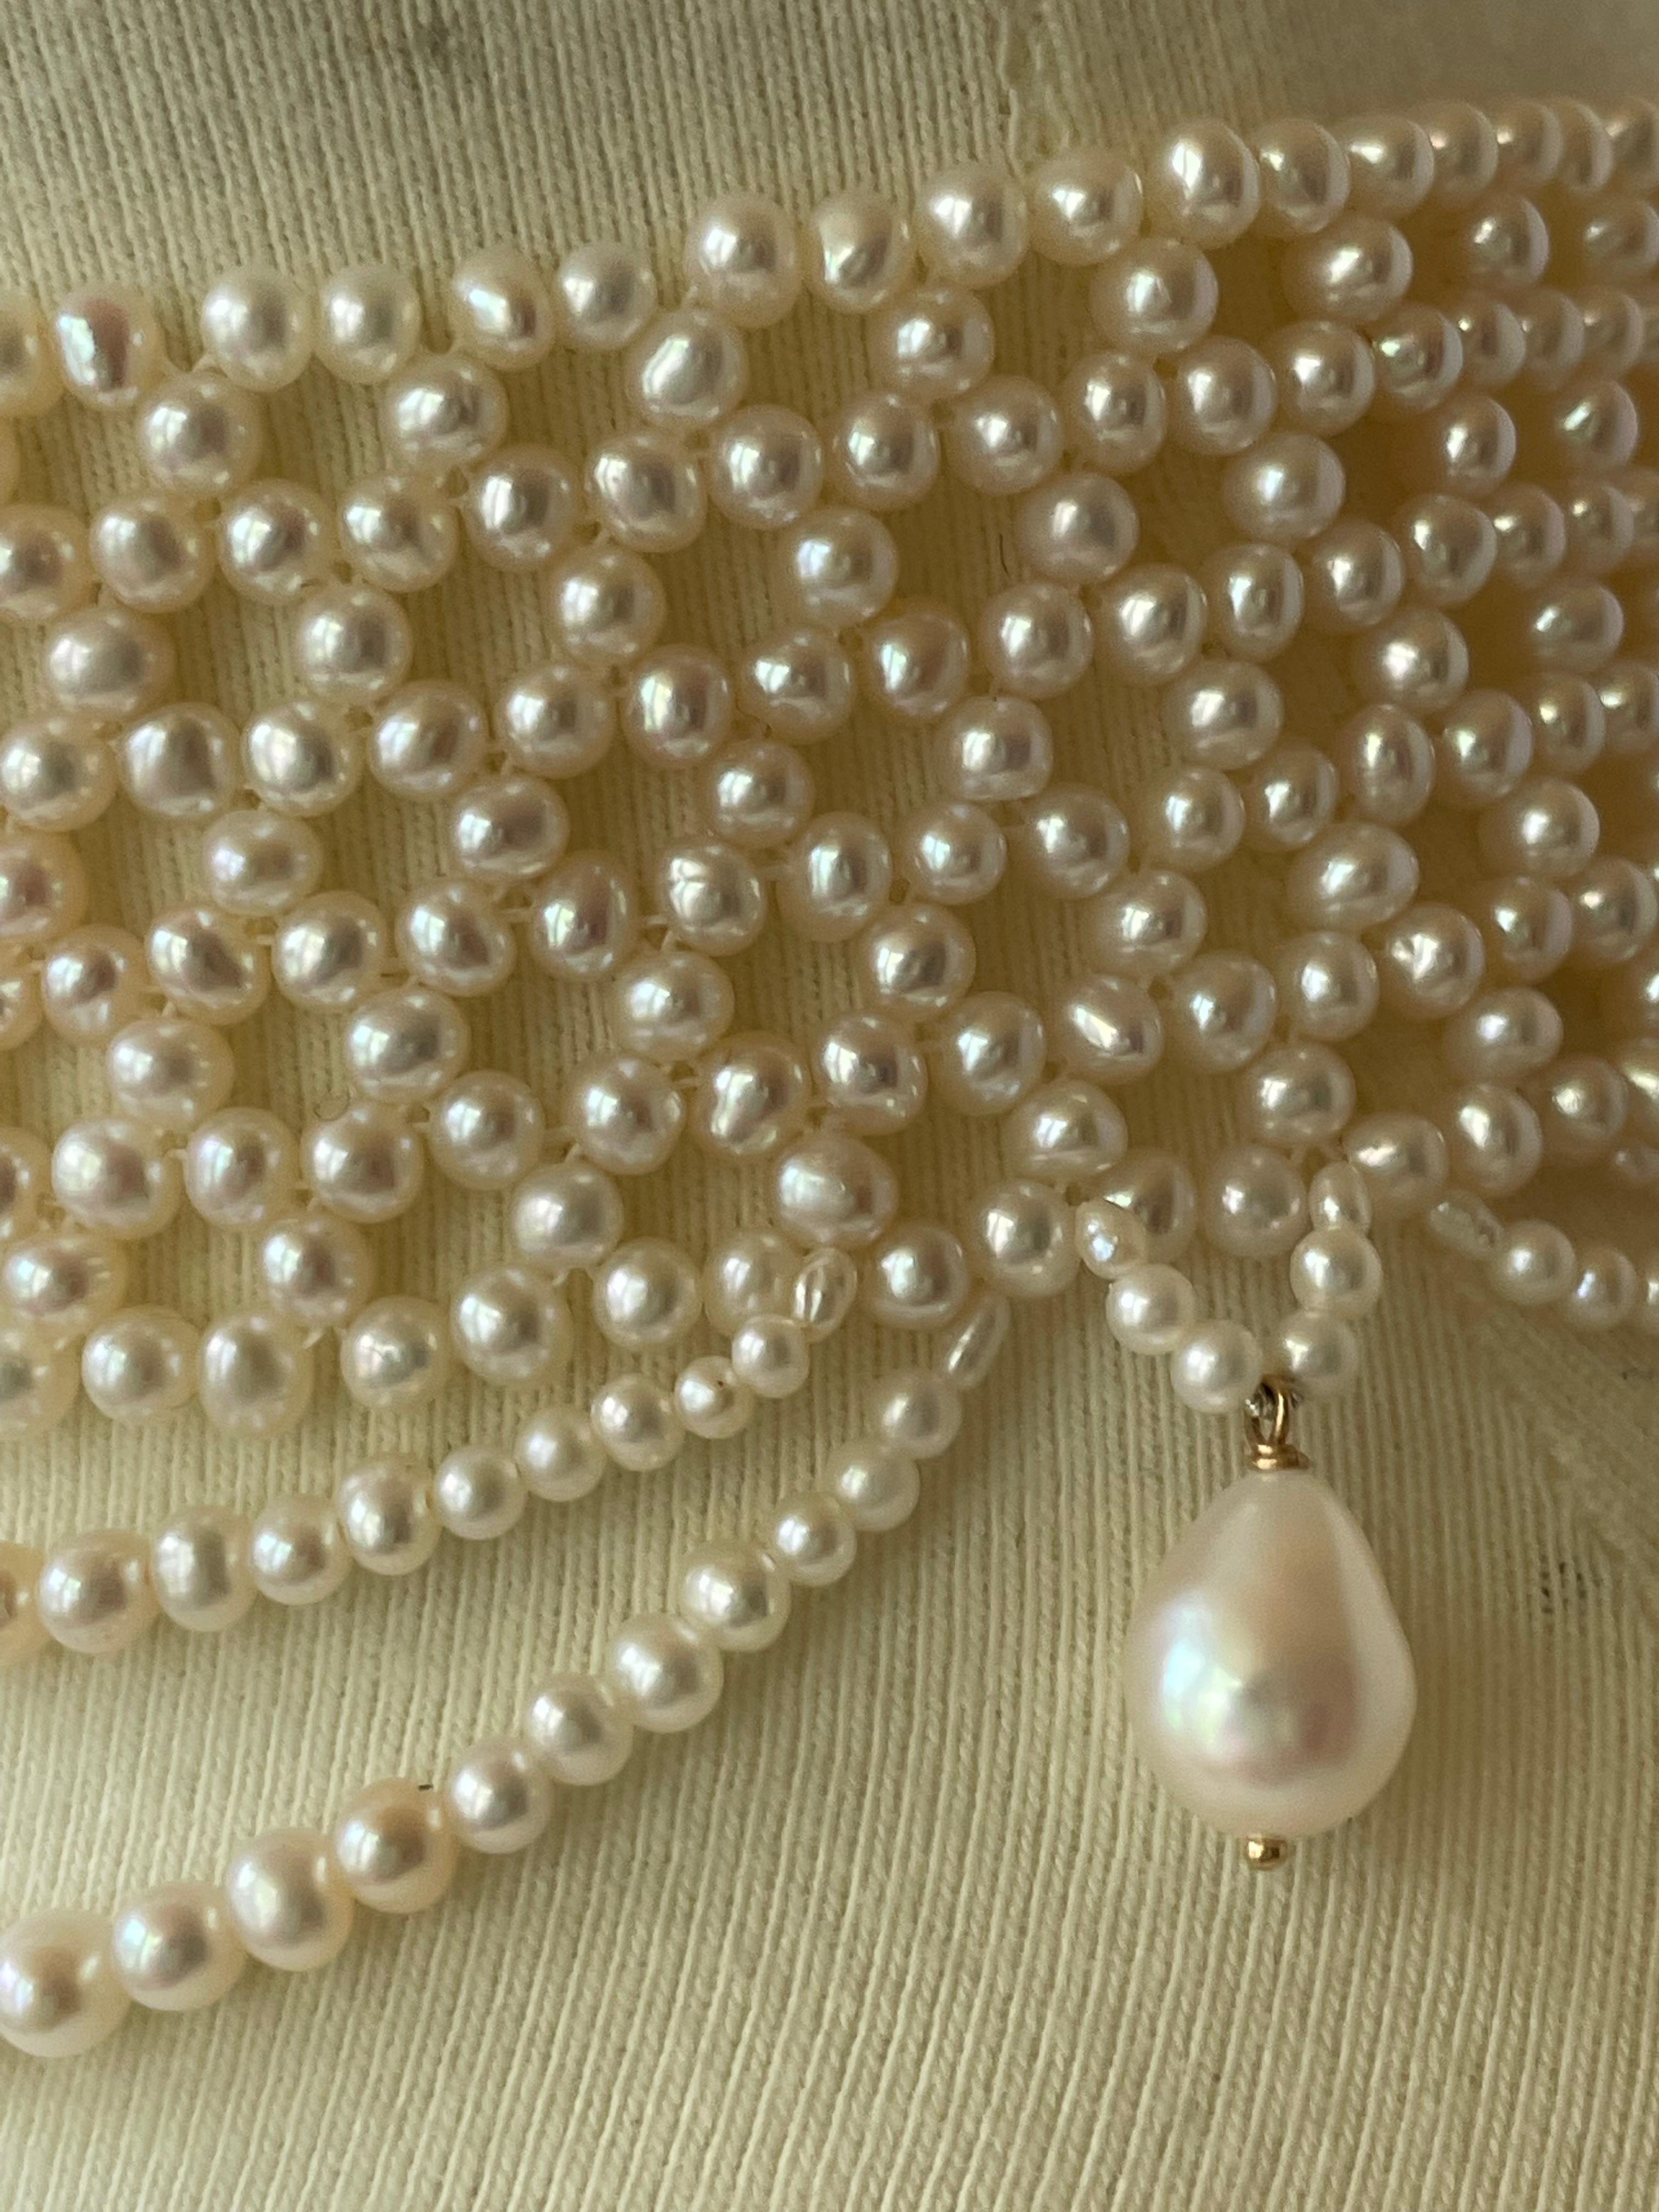 Marina J. Woven Pearl Draped Choker with Pearl Drops and Secure Sliding Clasp In New Condition For Sale In Los Angeles, CA